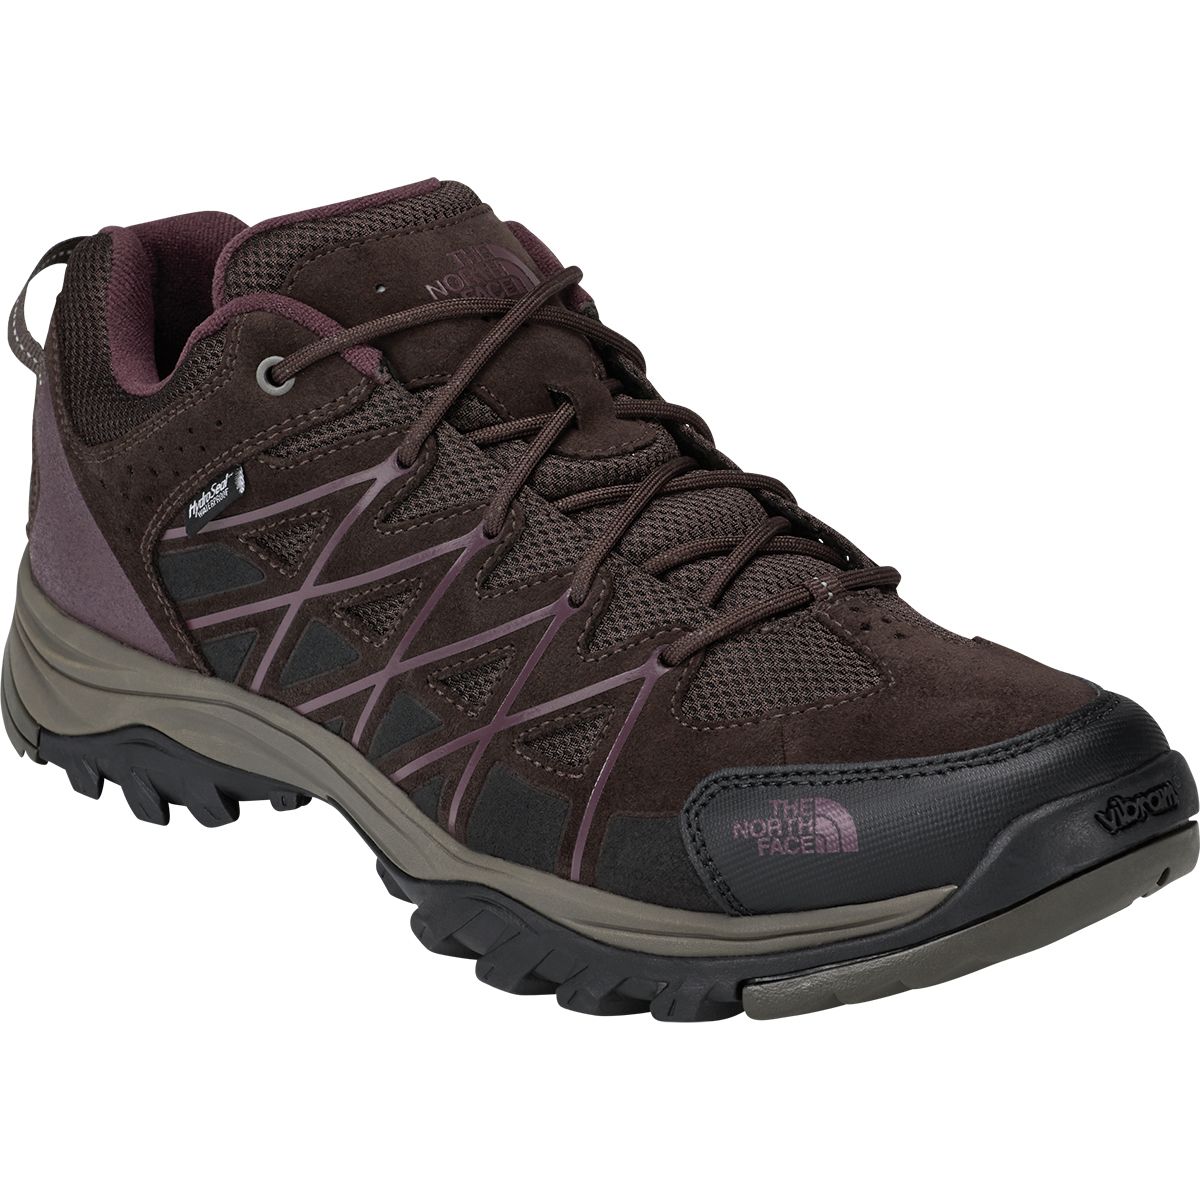 The North Face Storm Iii Hiking Shoe Outlet | bellvalefarms.com